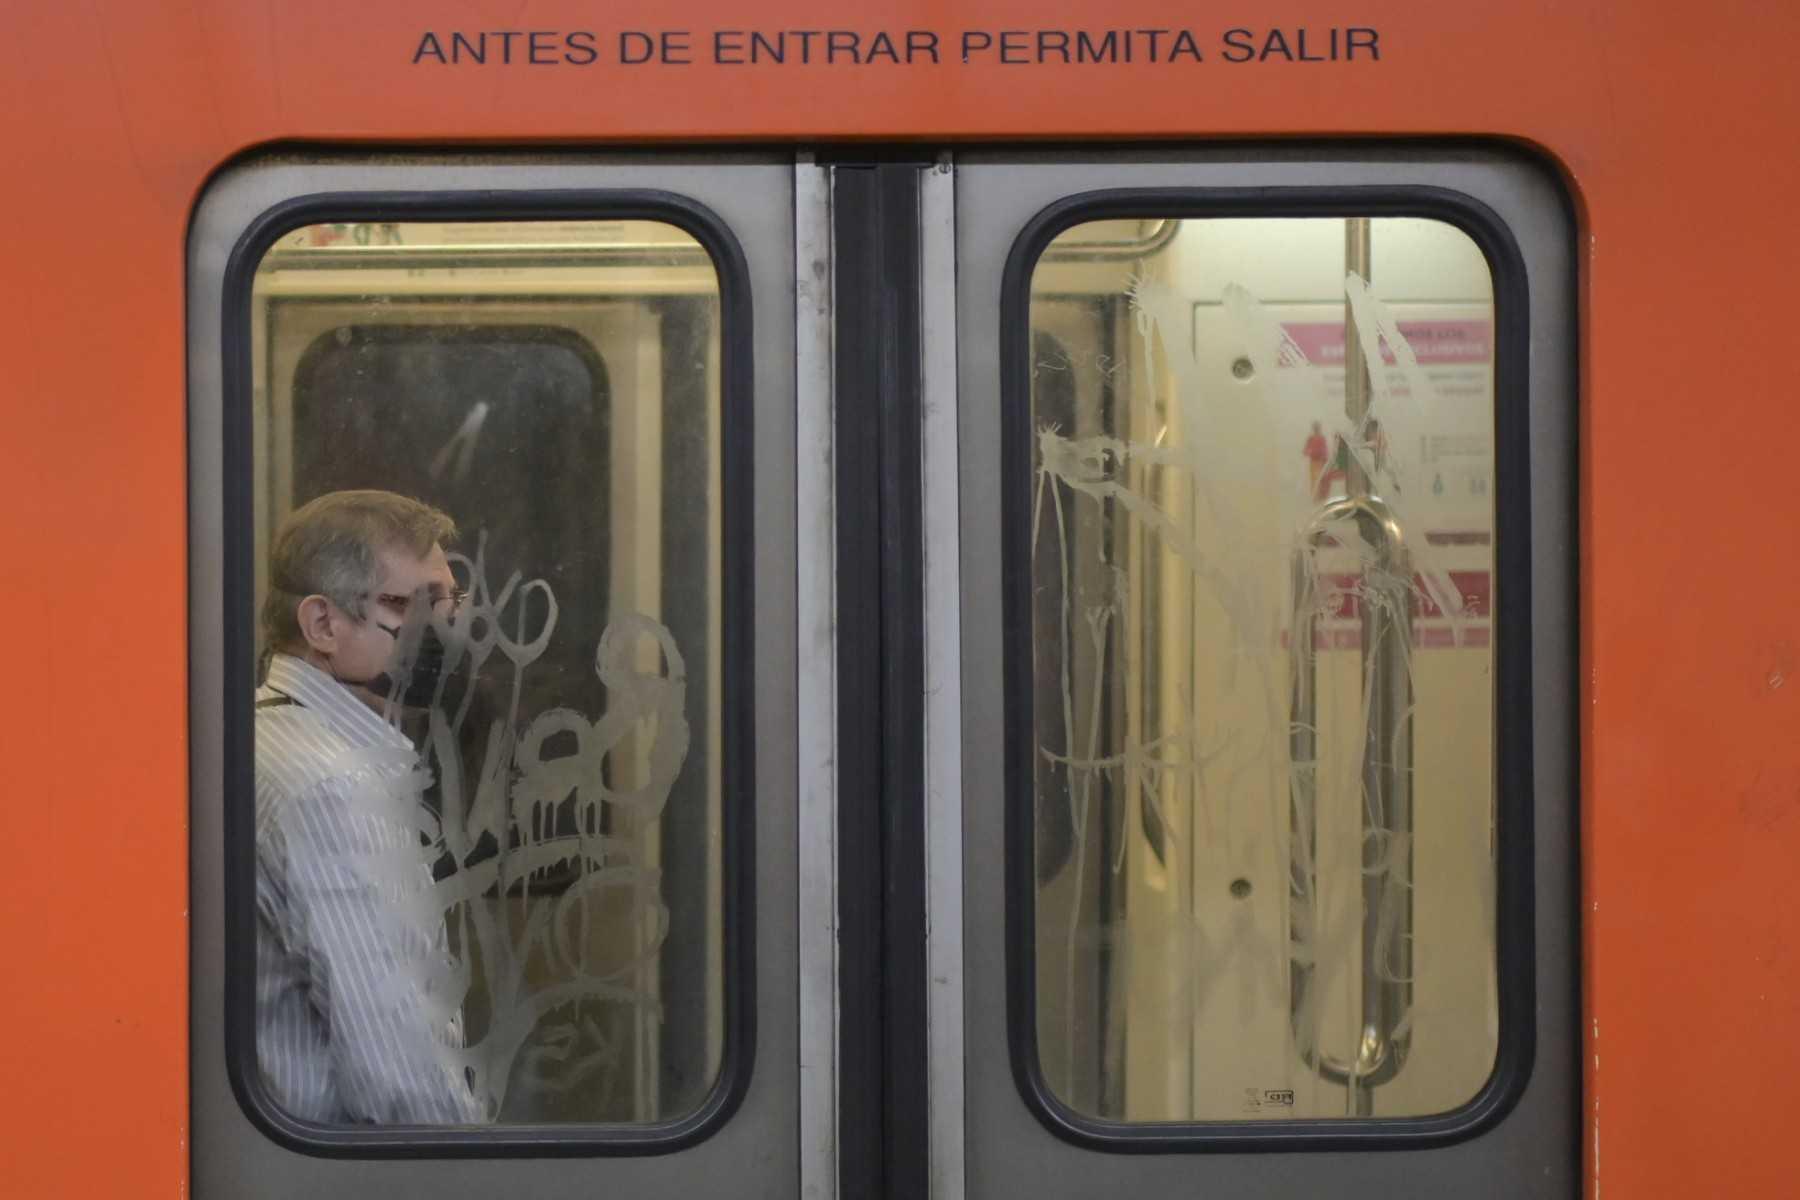 A man rides the subway in Mexico City, on March 24, 2020.